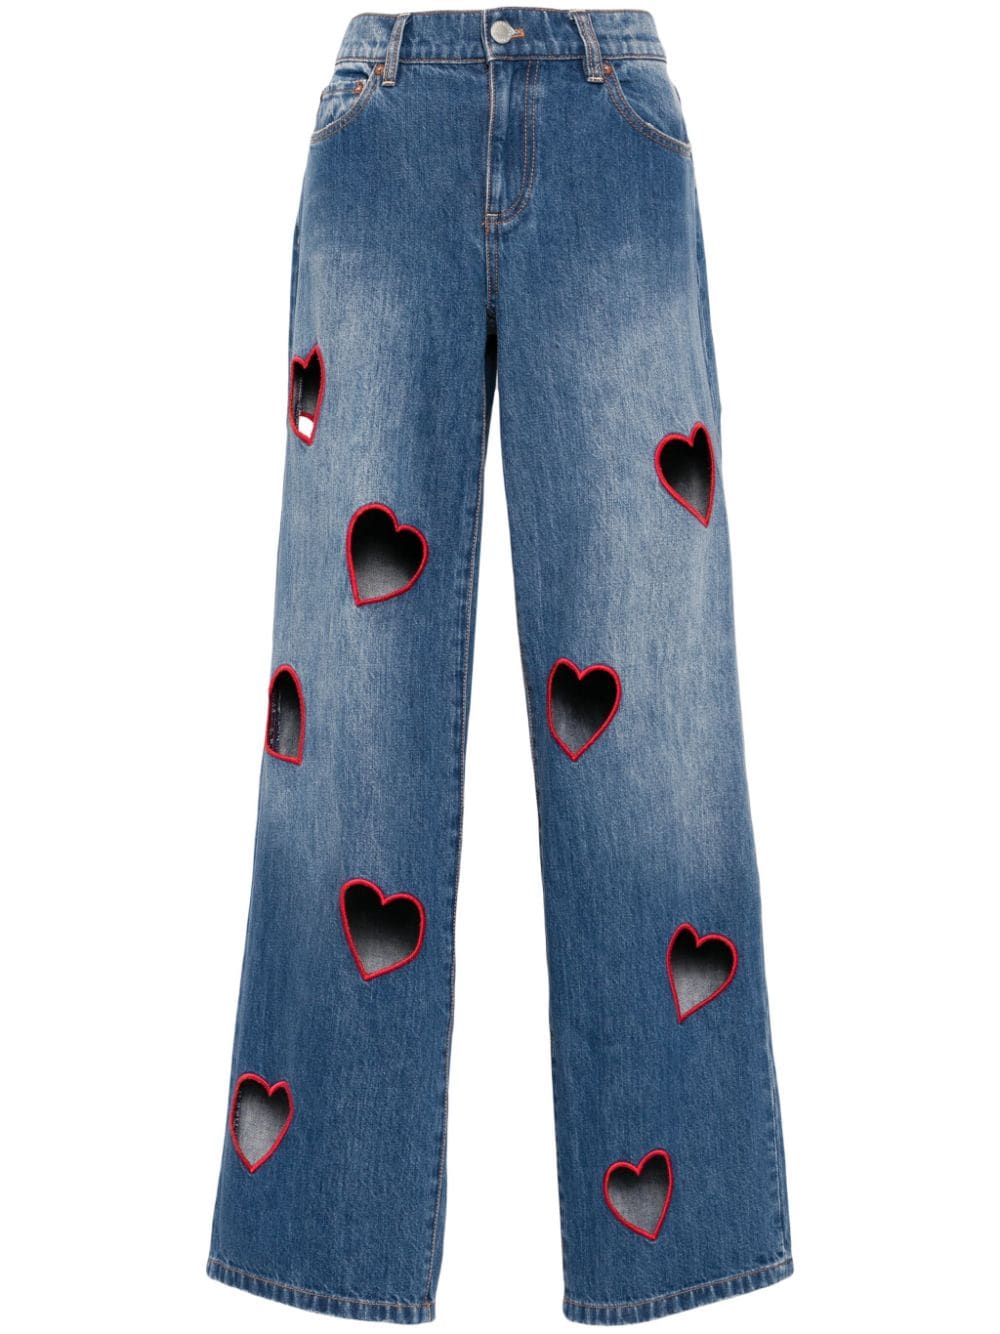 alice + olivia Karrie cut-out jeans - Blue von alice + olivia